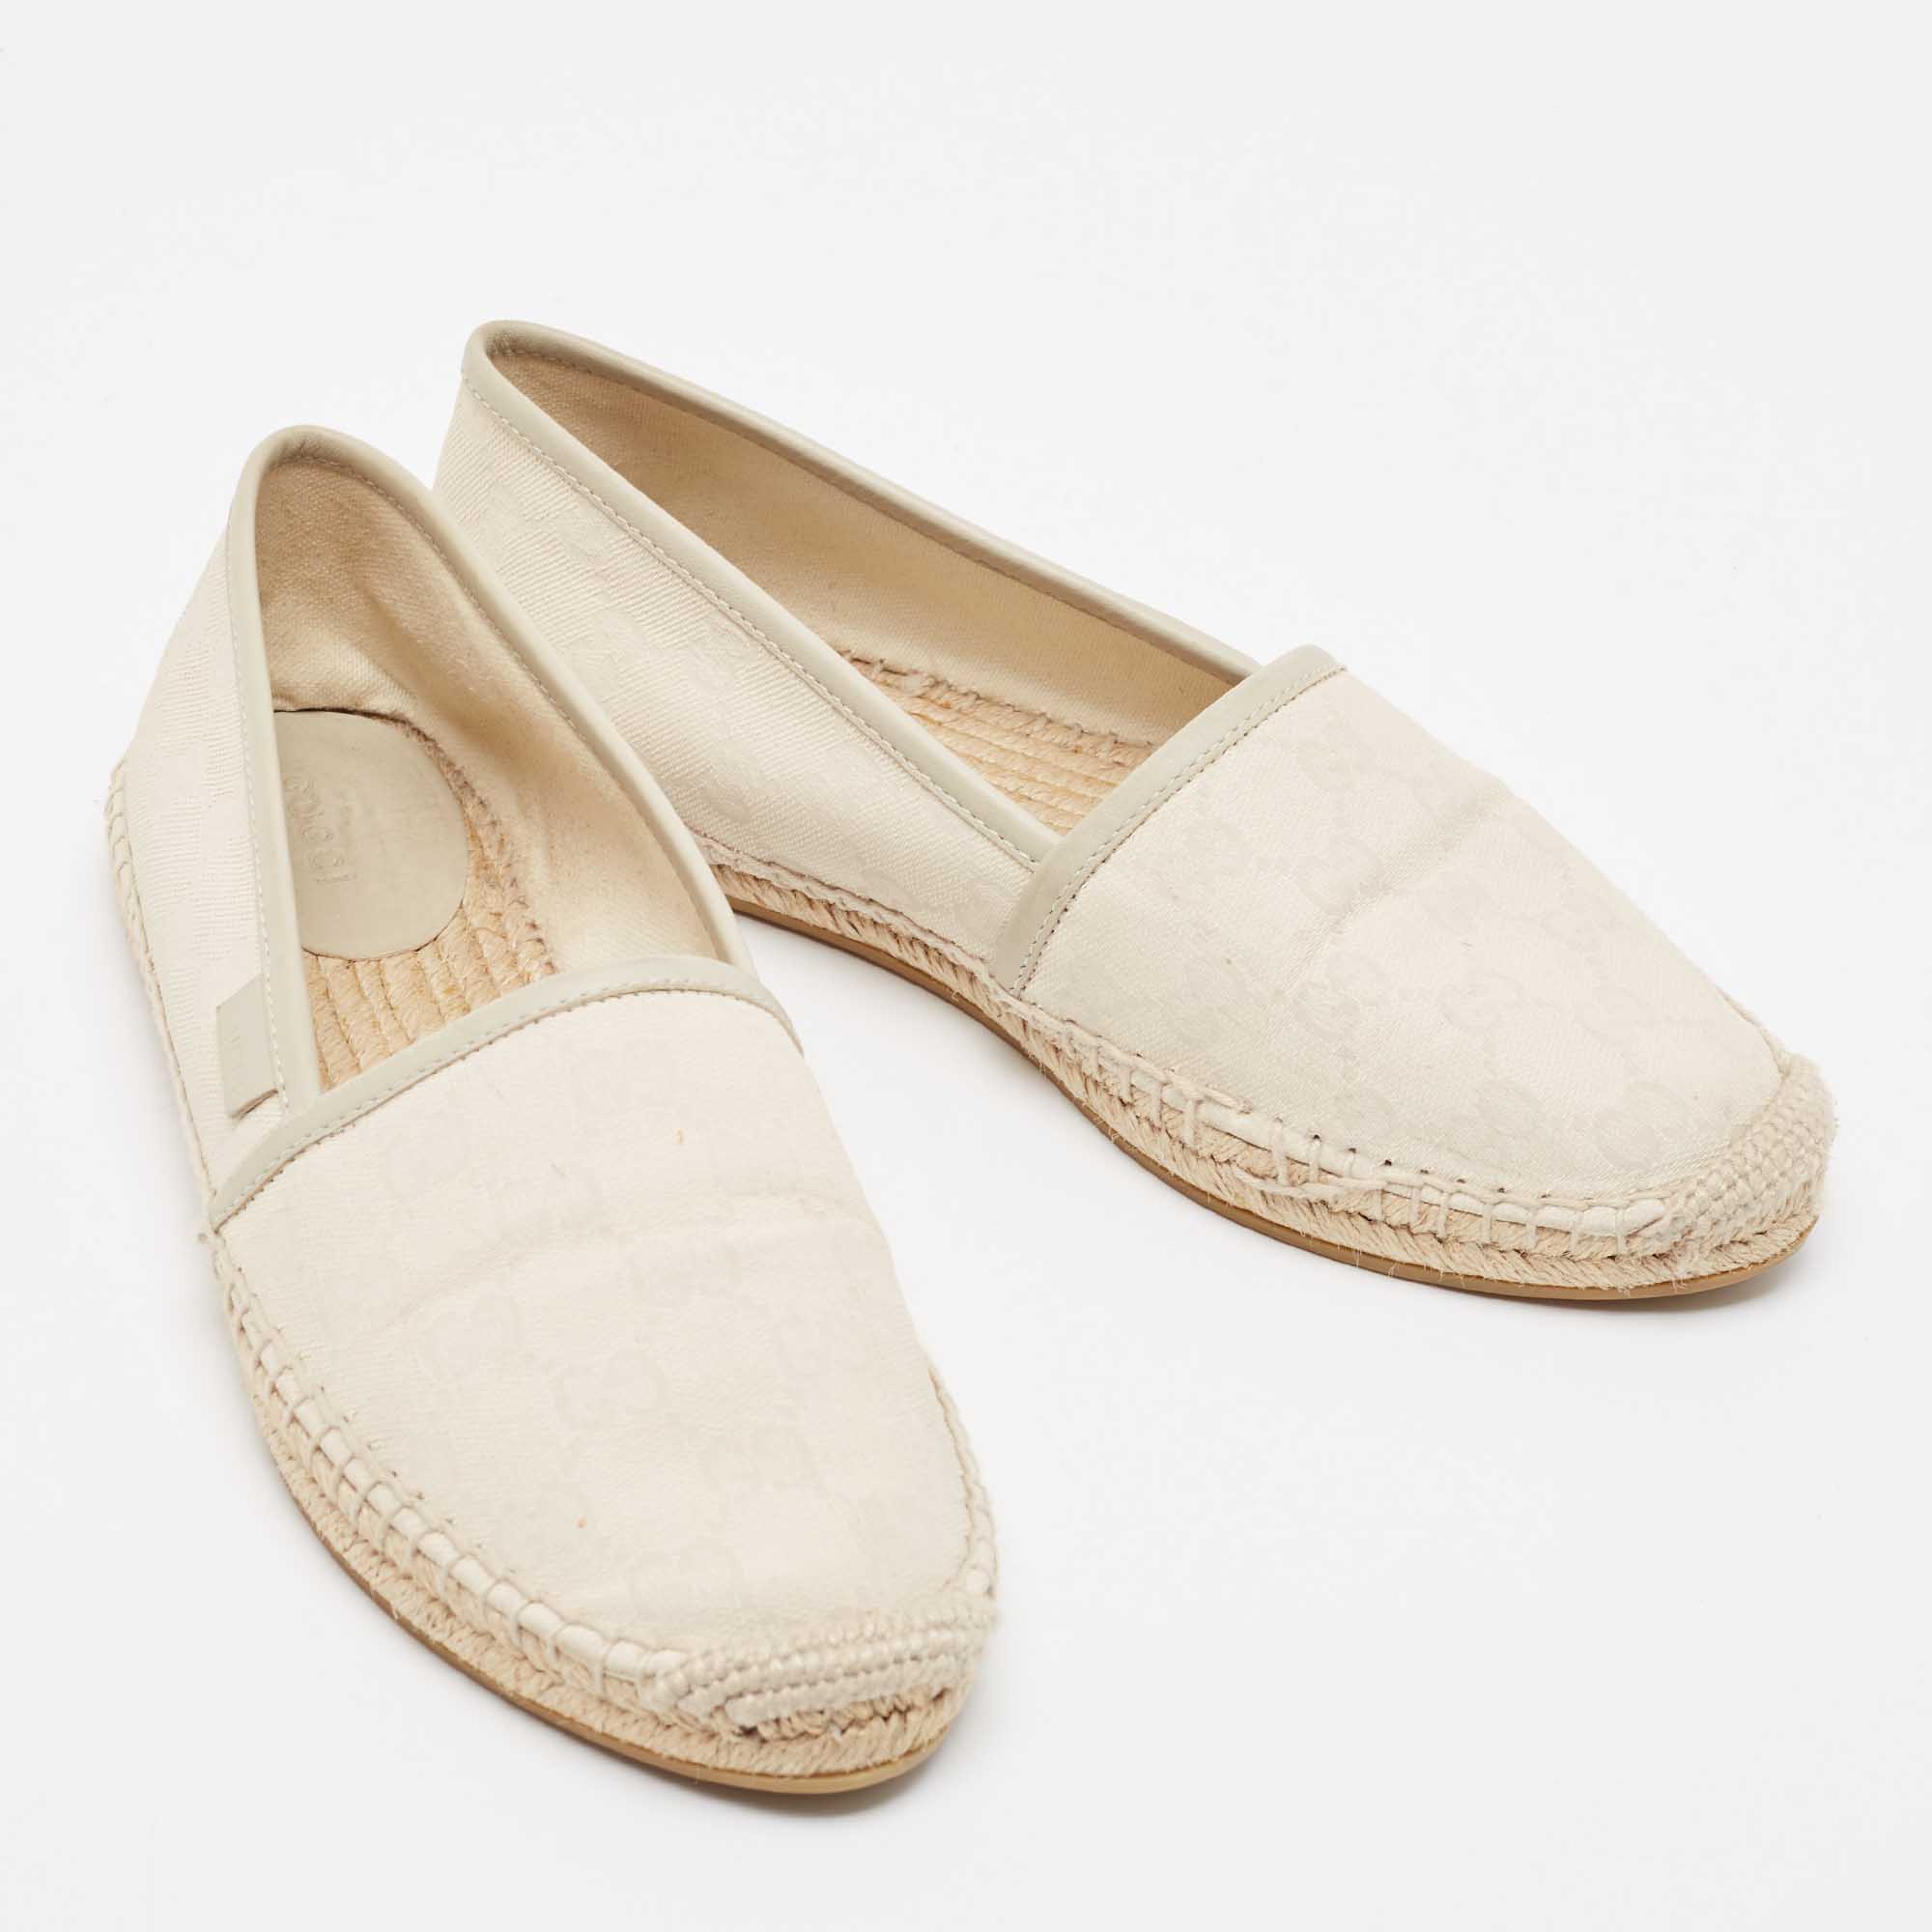 Gucci Cream/Grey GG Canvas And Leather Espadrilles Flats Size 38.5